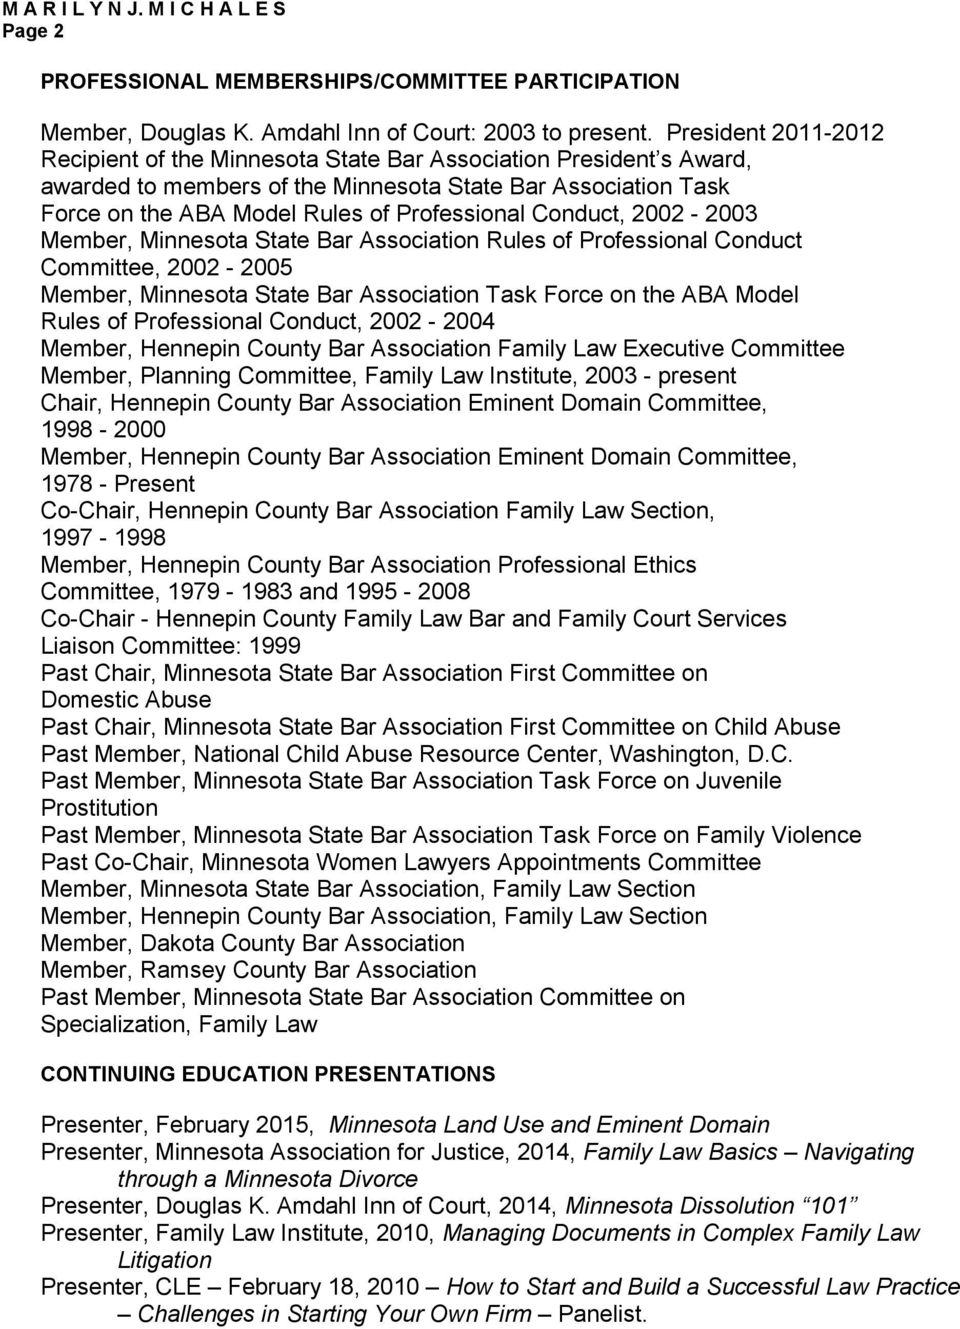 Conduct, 2002-2003 Member, Minnesota State Bar Association Rules of Professional Conduct Committee, 2002-2005 Member, Minnesota State Bar Association Task Force on the ABA Model Rules of Professional